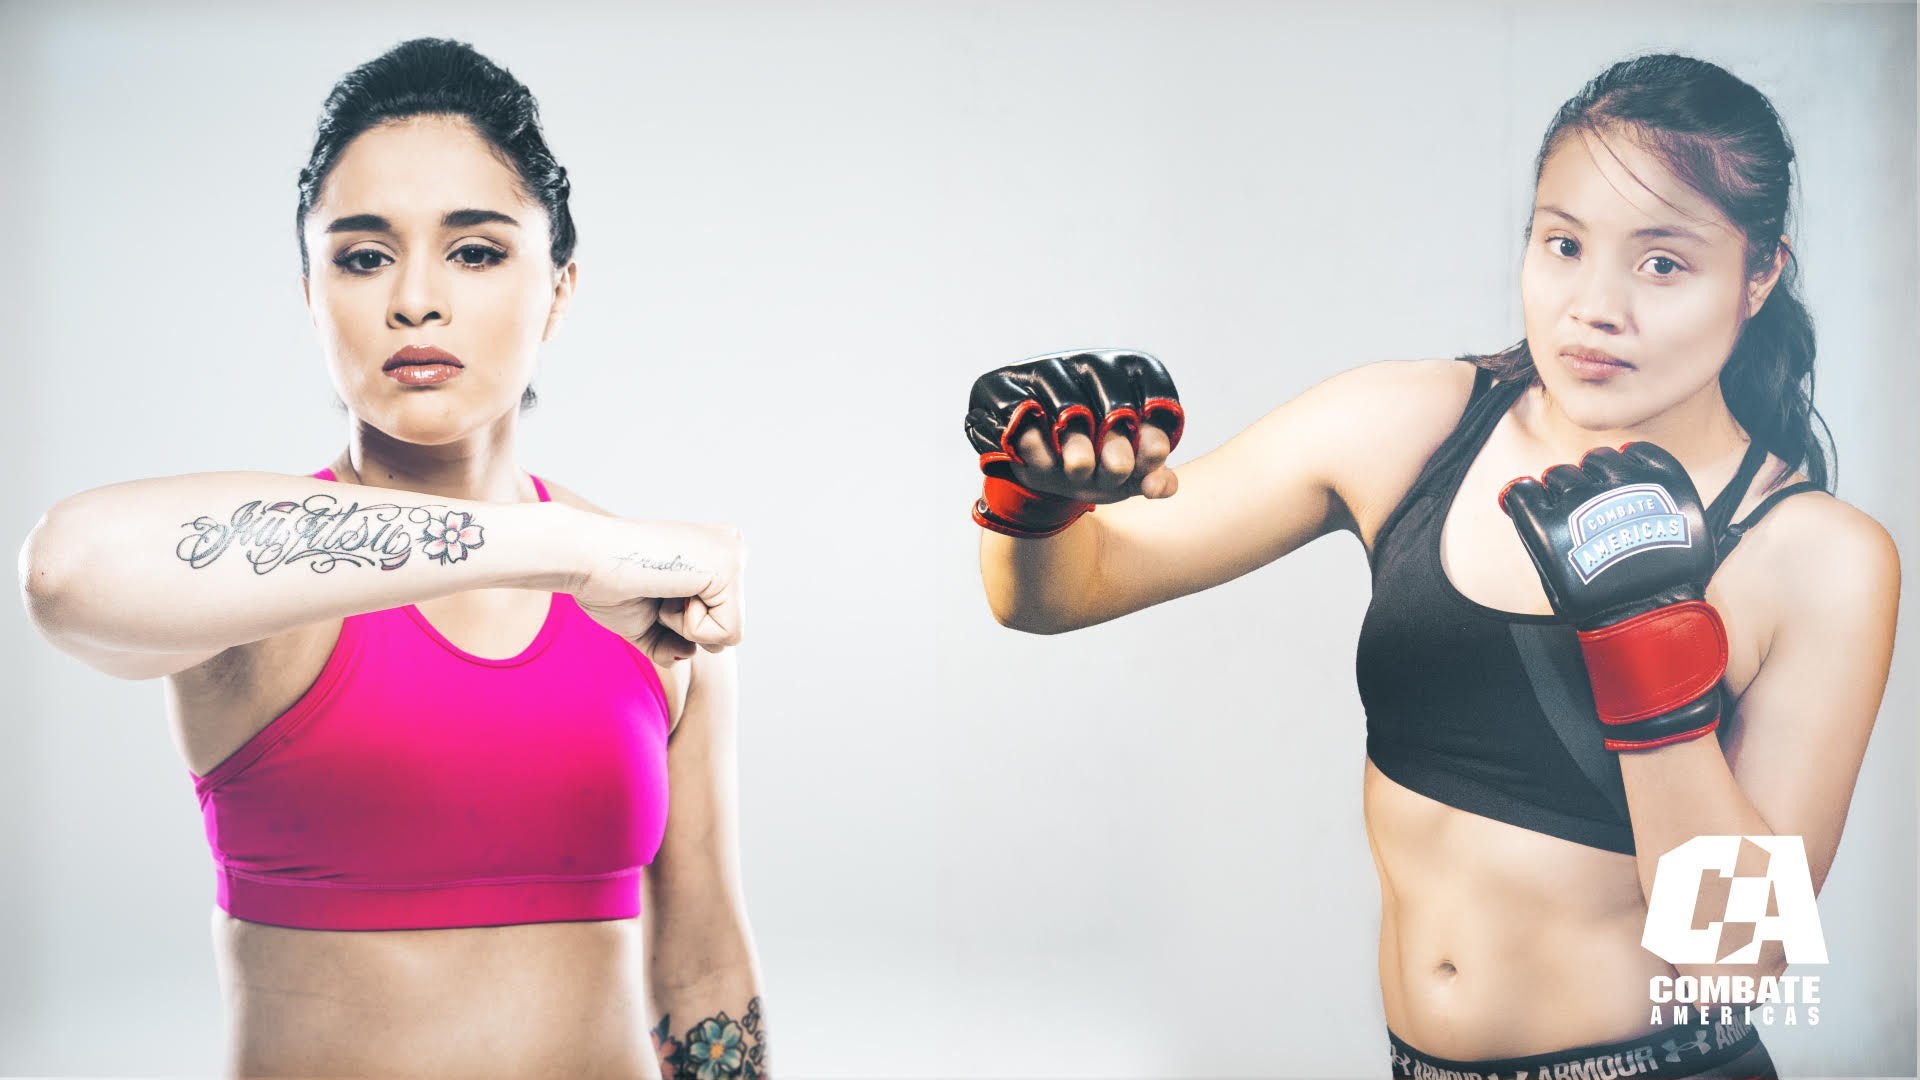 ICYMI: Copa Combate: Women’s Co-Main Event Added To Live TV Broadcast